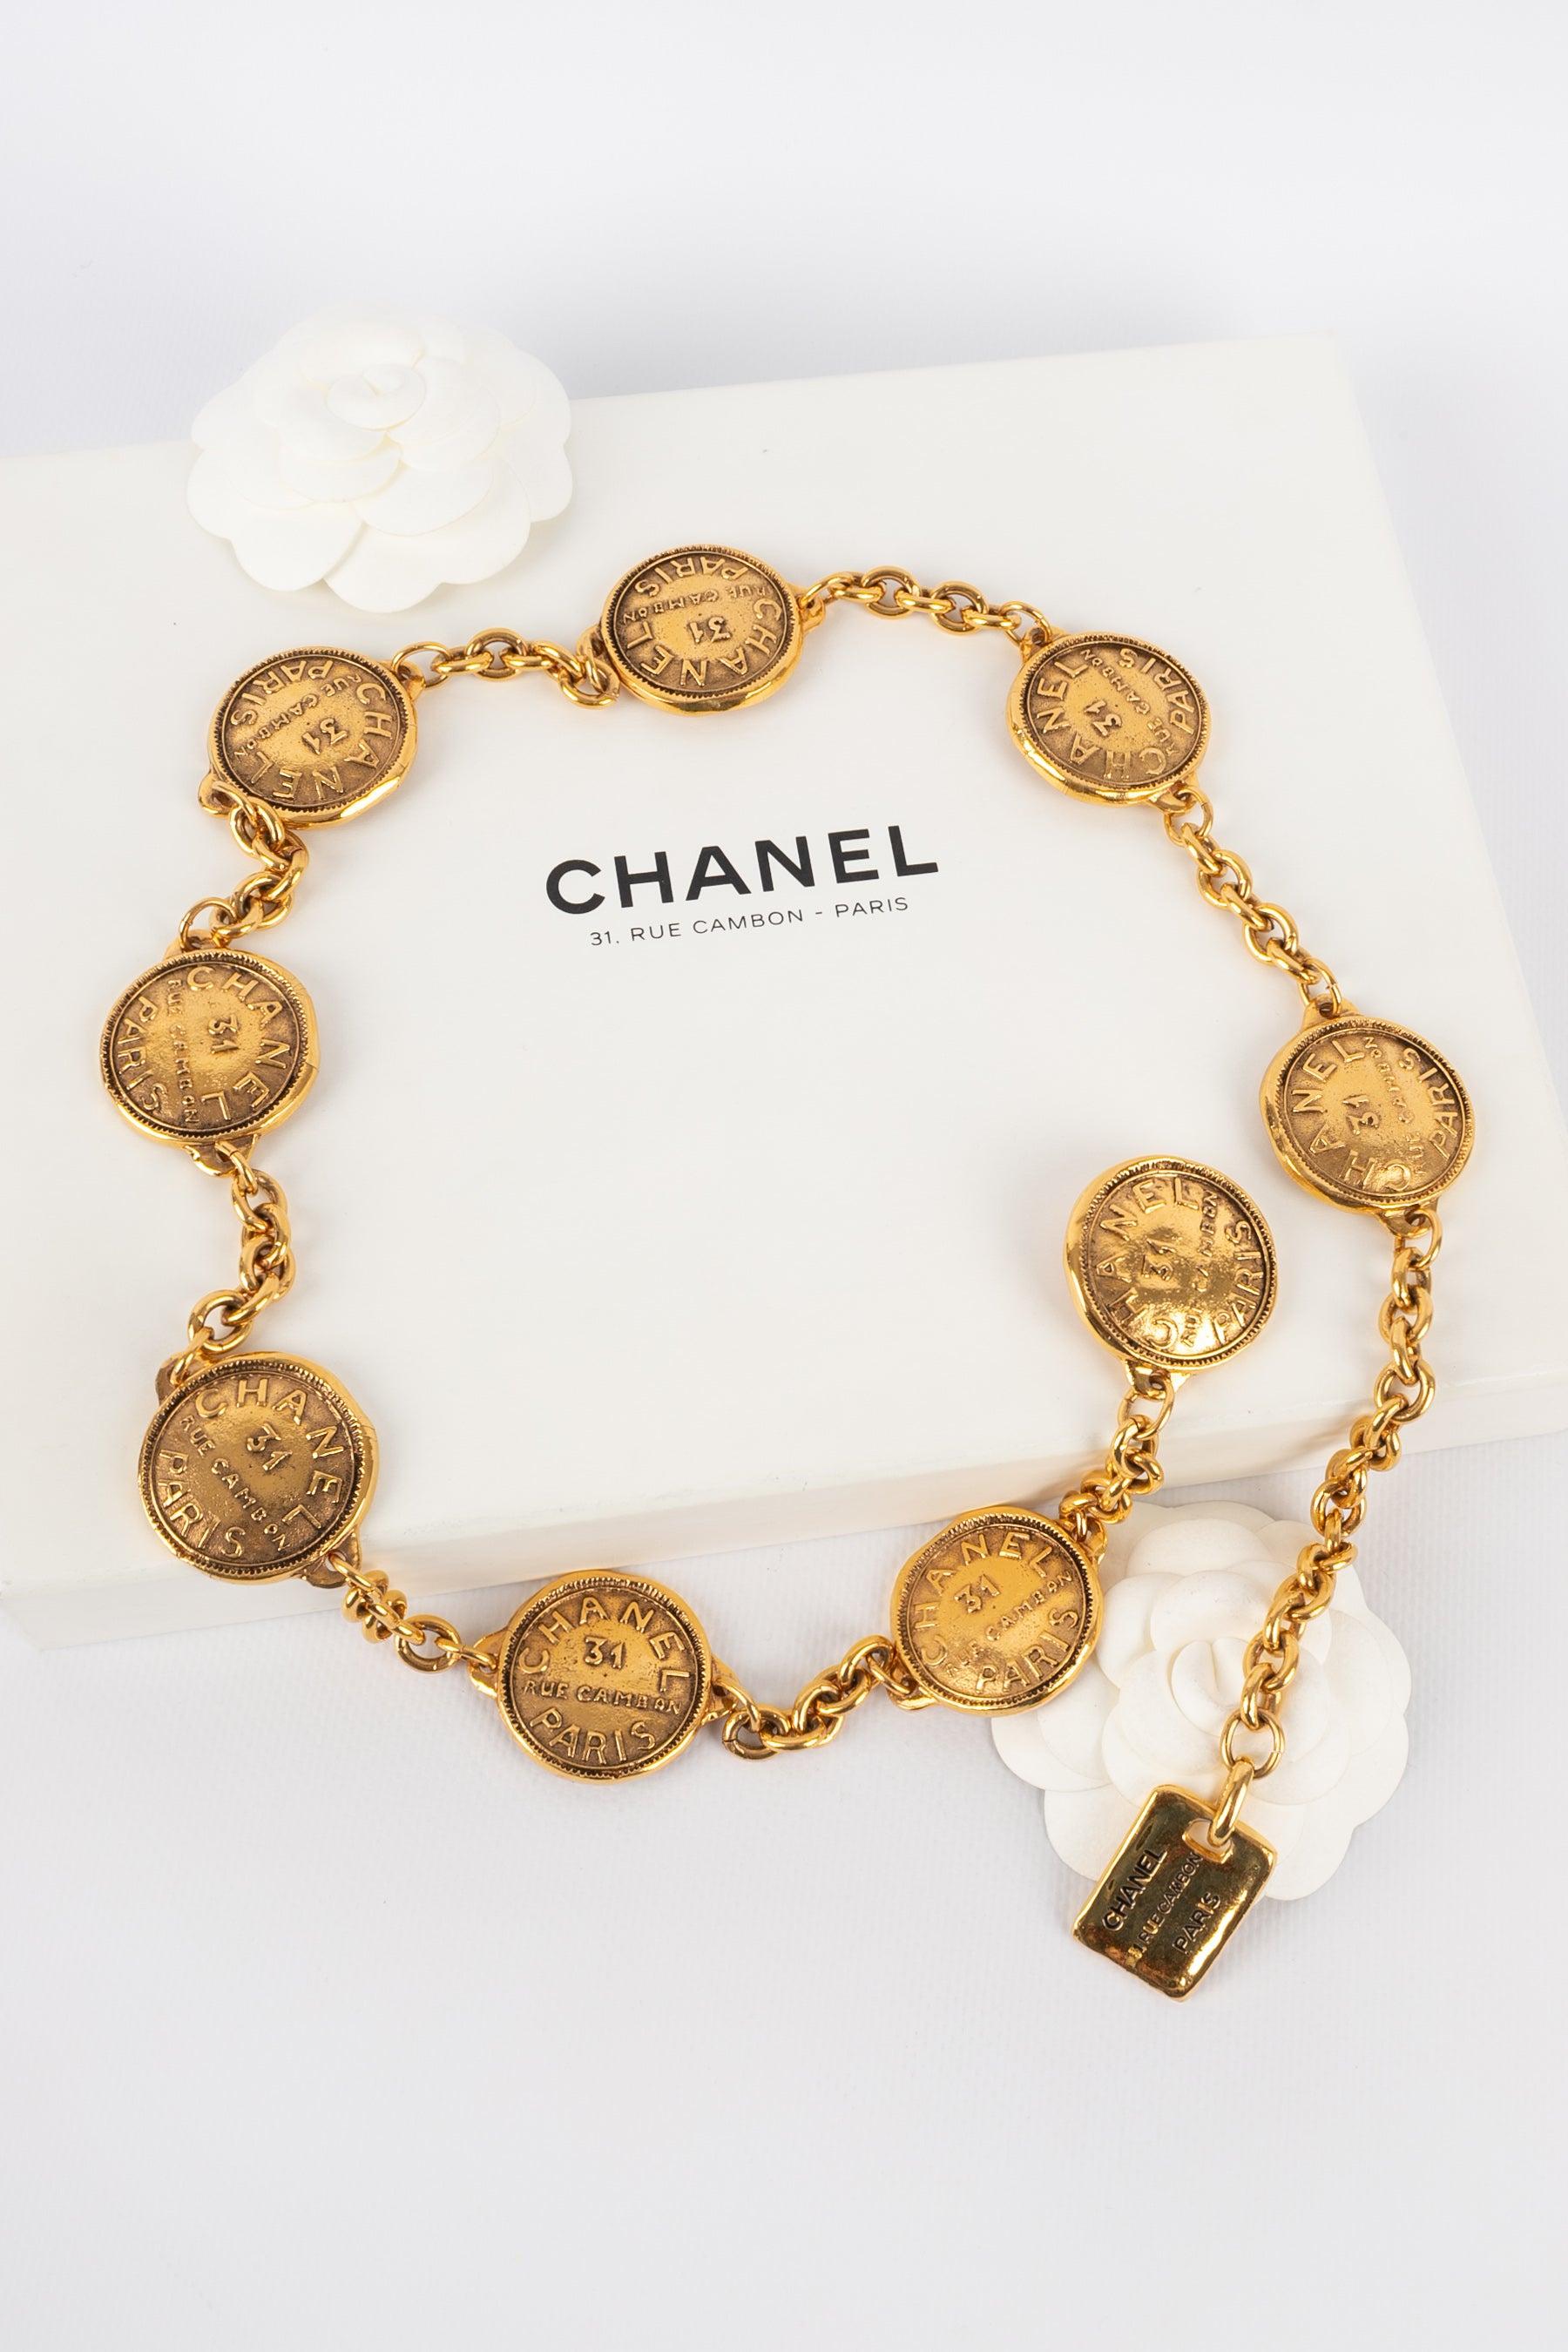 Chanel Belt of Chains and Medallions Representing Coins, 1980s For Sale 5